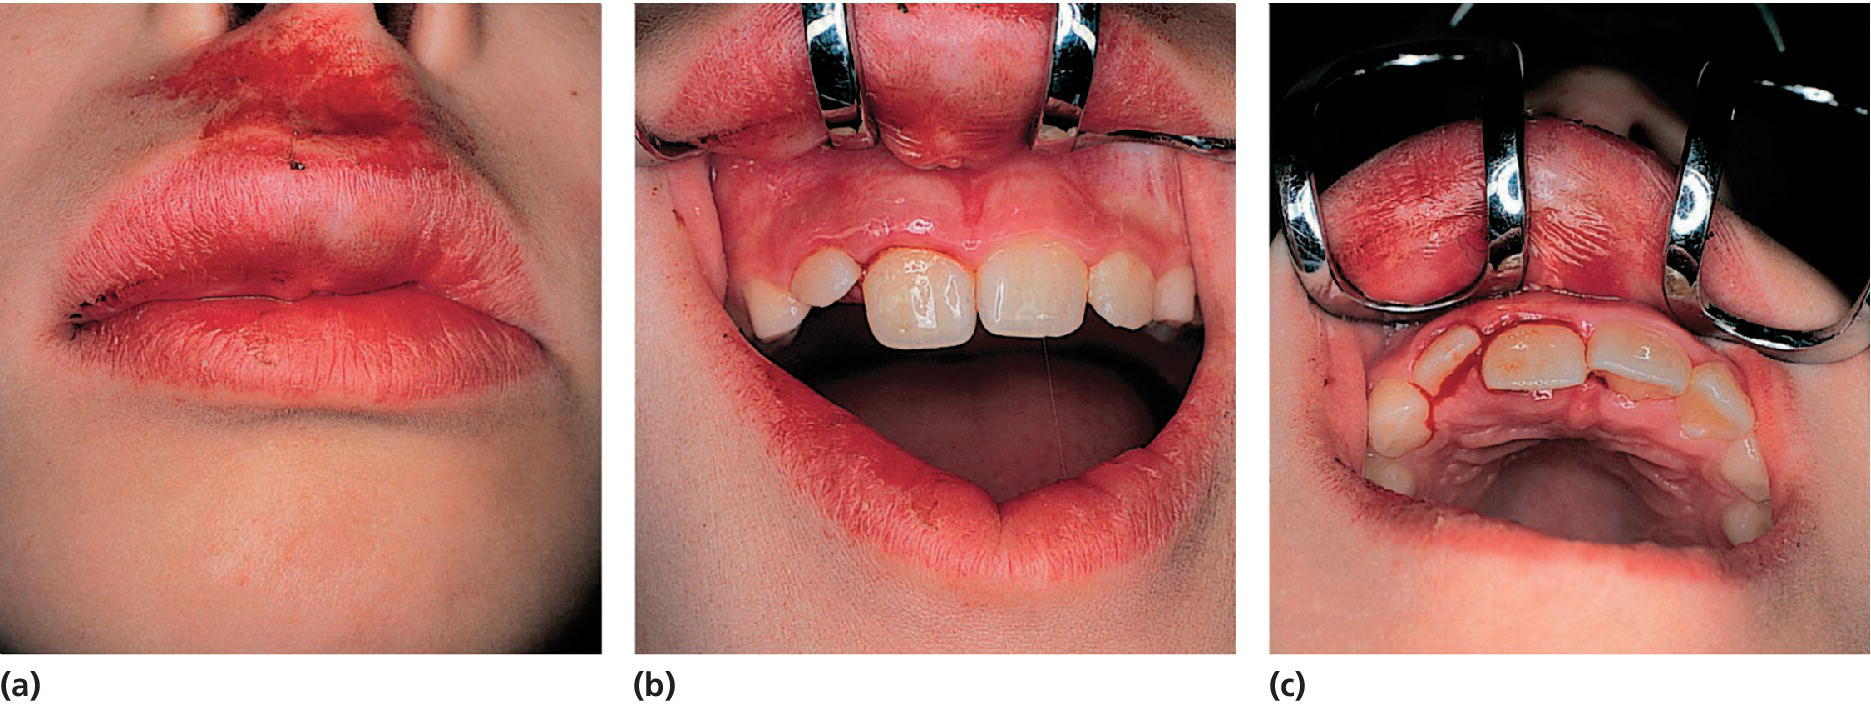 3 Photos illustrating clinical appearance after lateral luxation of the right central incisor.